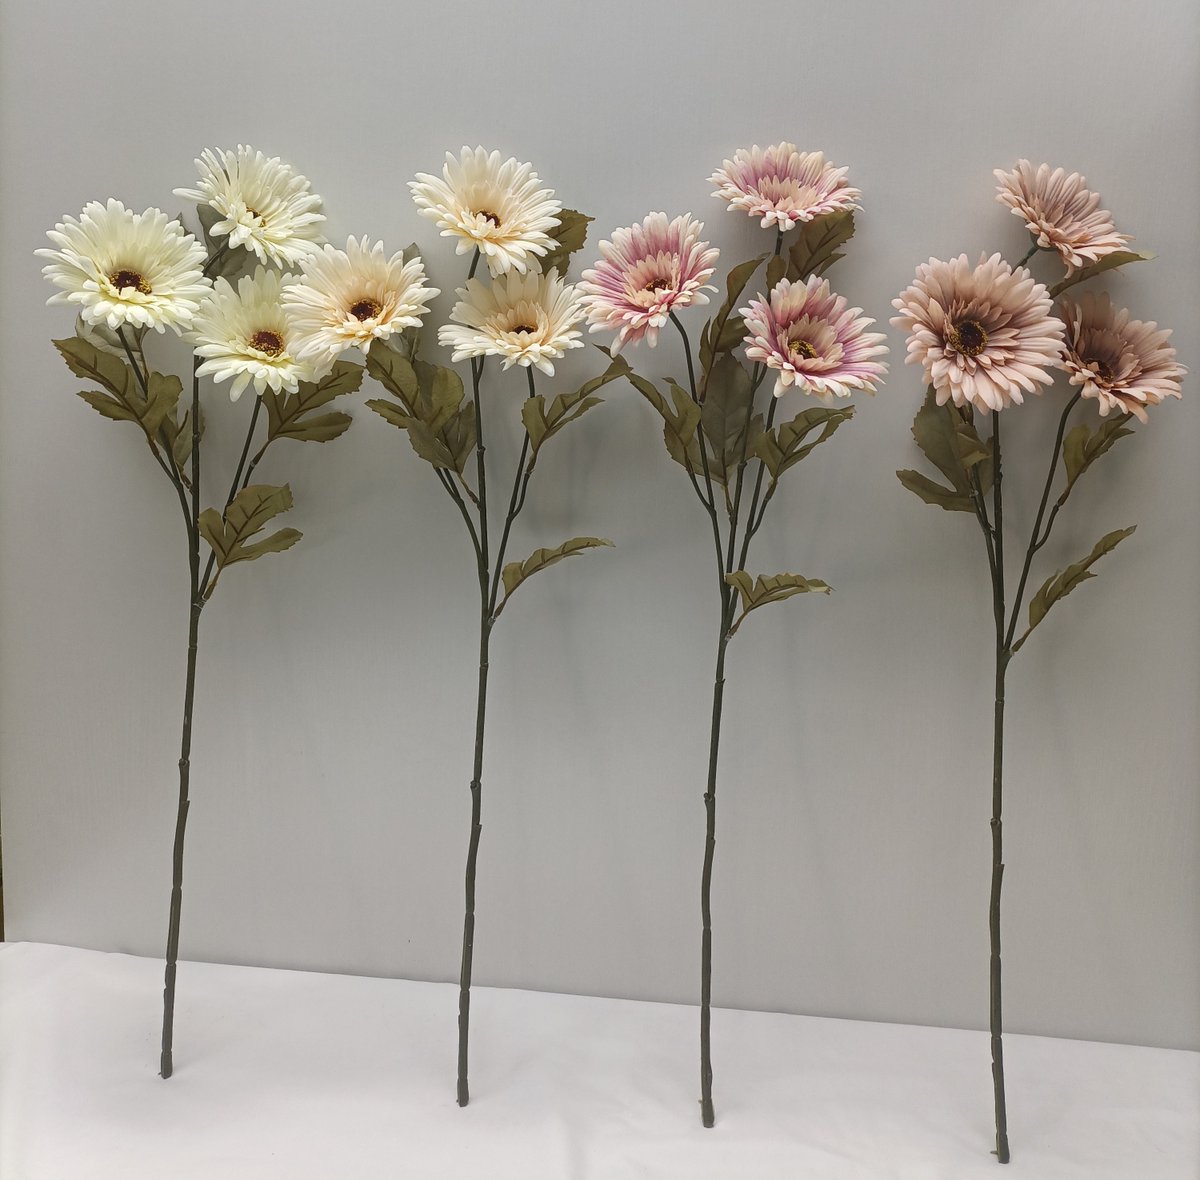 factory wholesale quality #artificialflowers #silkflowers . Welcome, contact us to get the catalog and price. WhatsApp: +8615036062860  E: ericzhang@kcolorcrafts.com